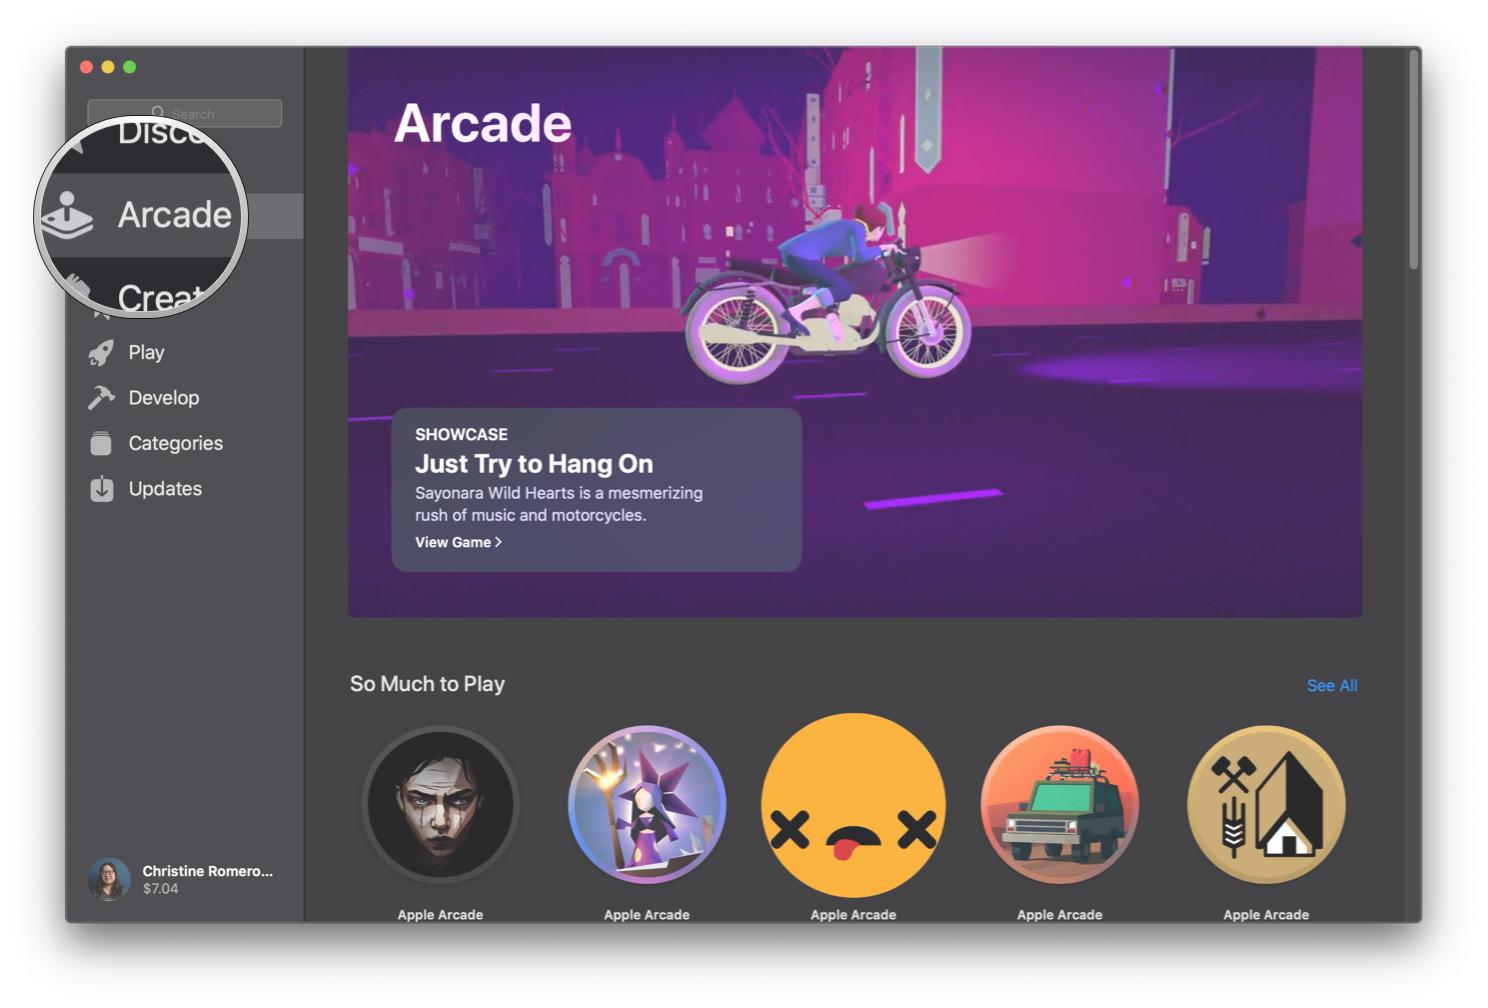 How to select and start playing a game on Apple Arcade on Mac by showing steps: Click Arcade tab on App Store